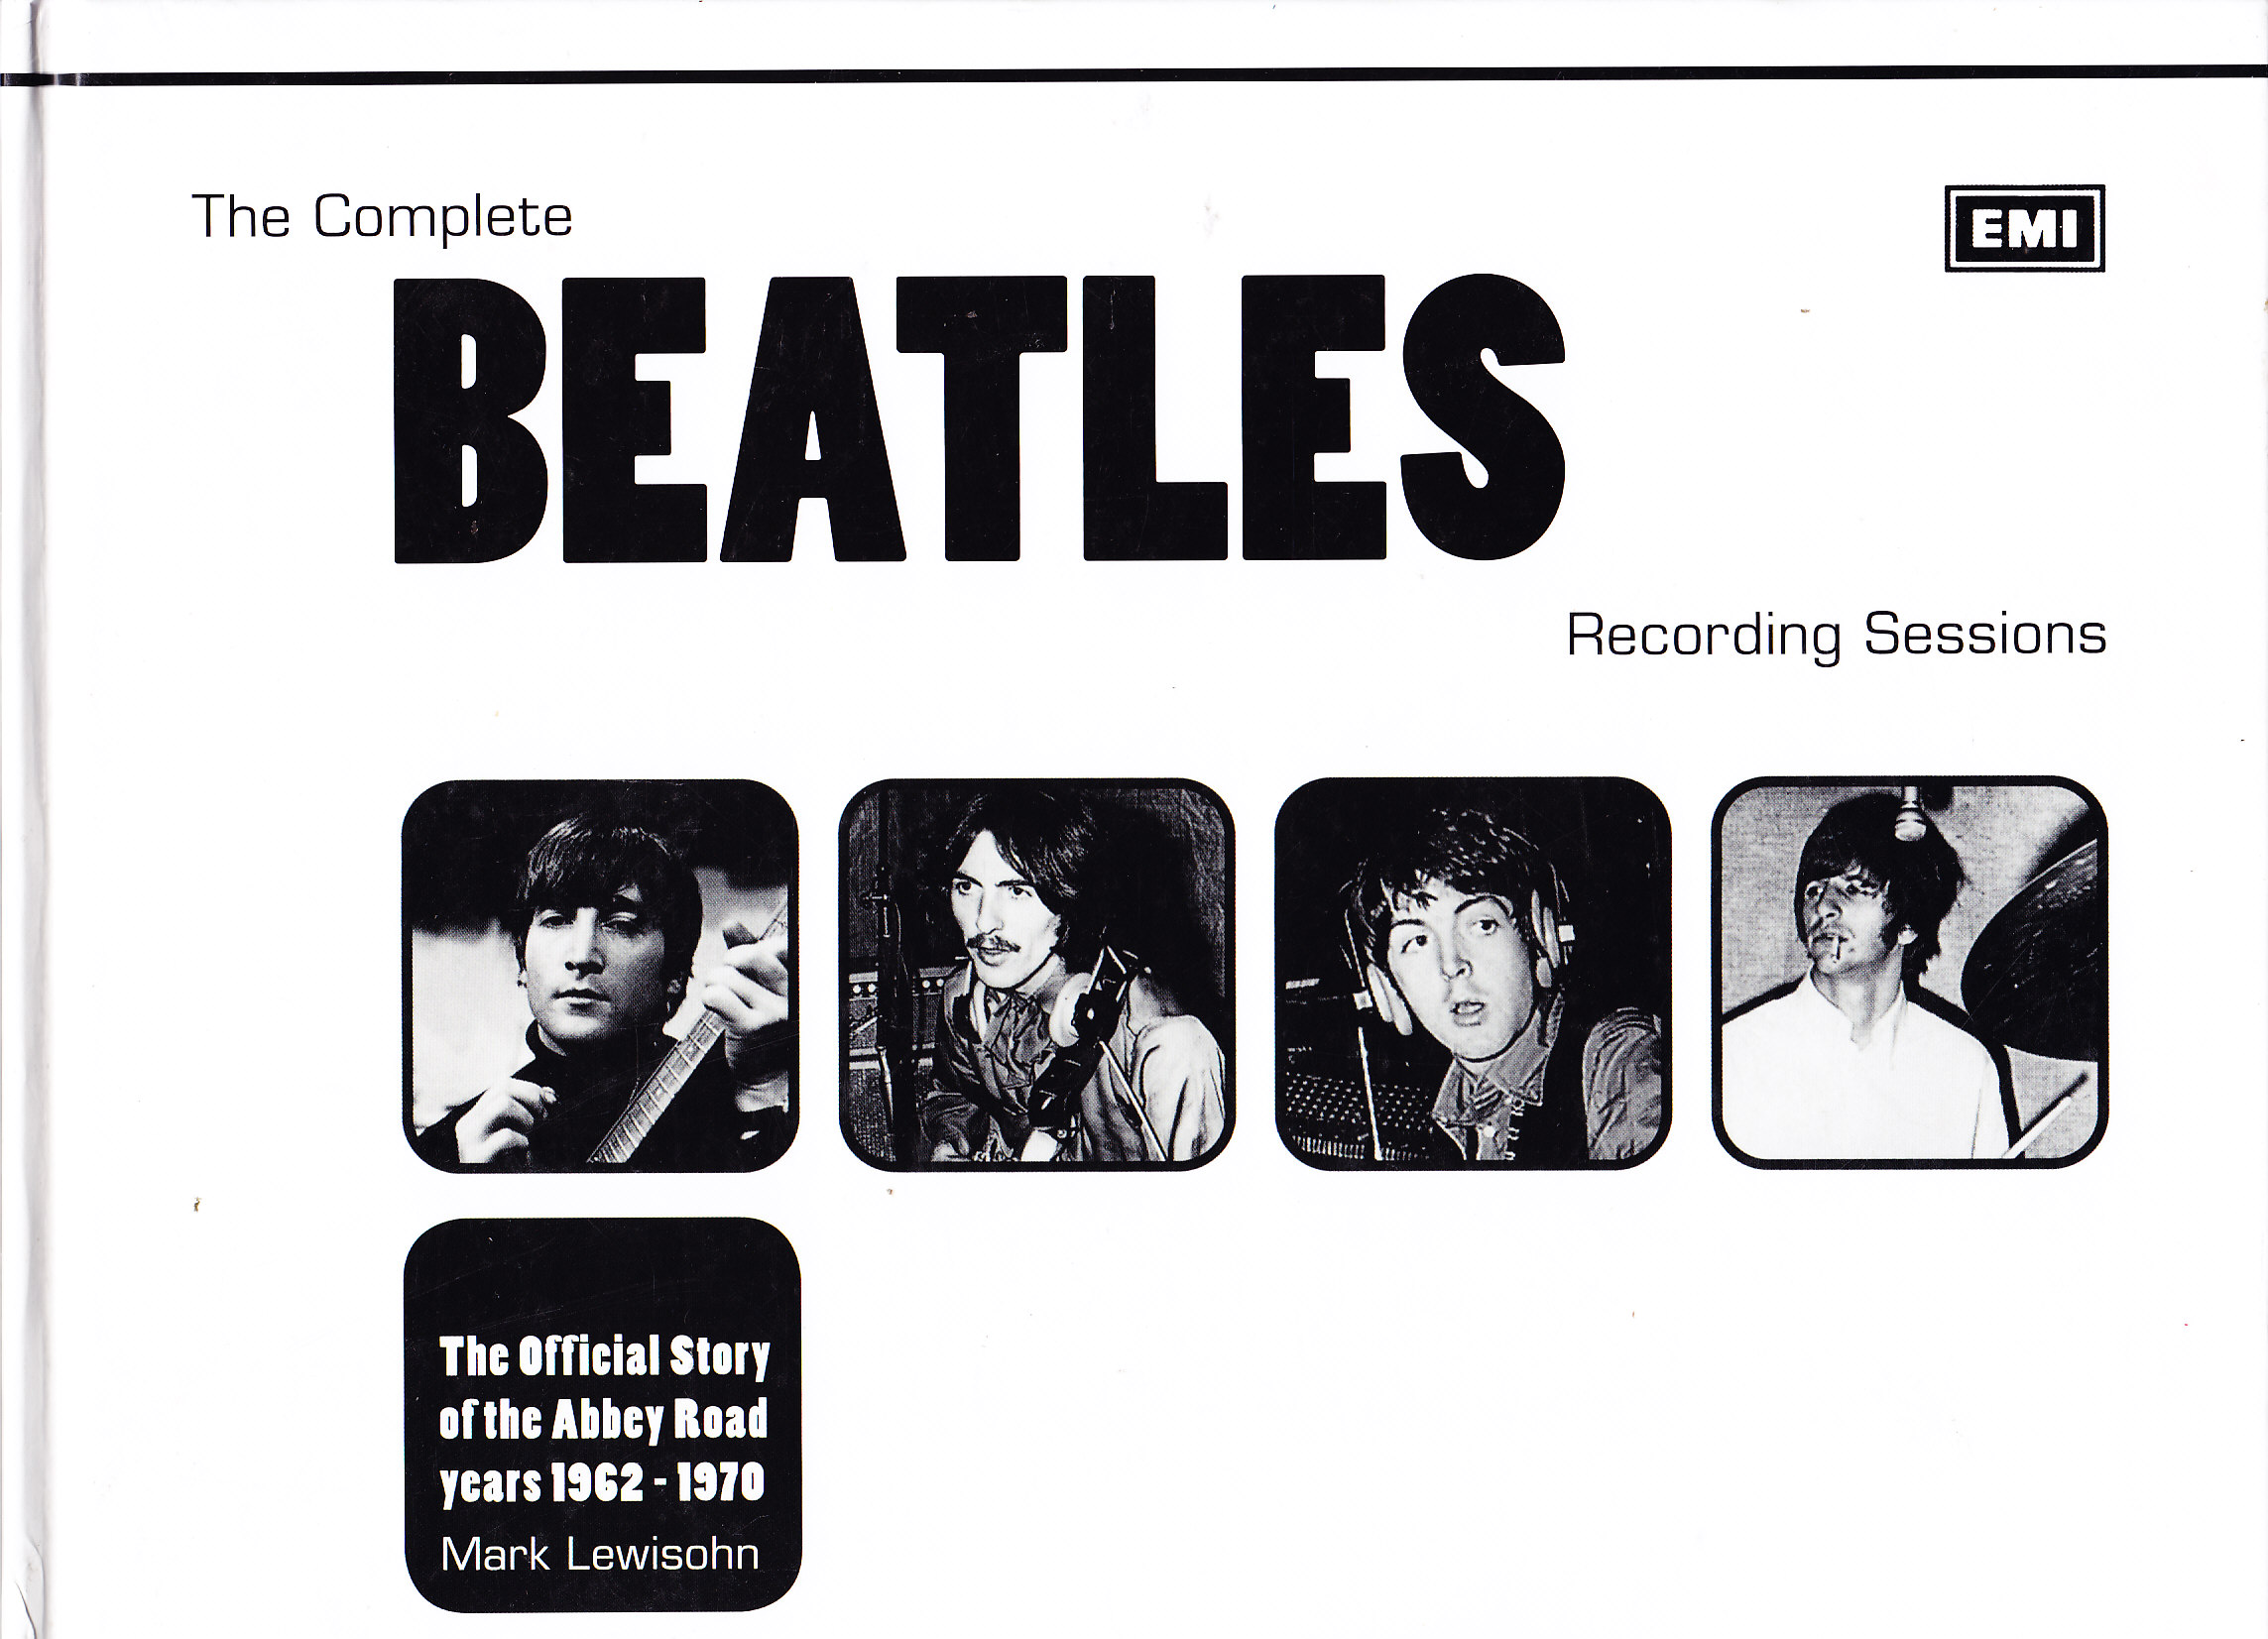 THE COMPLETE BEATLES RECORDING SESSIONS